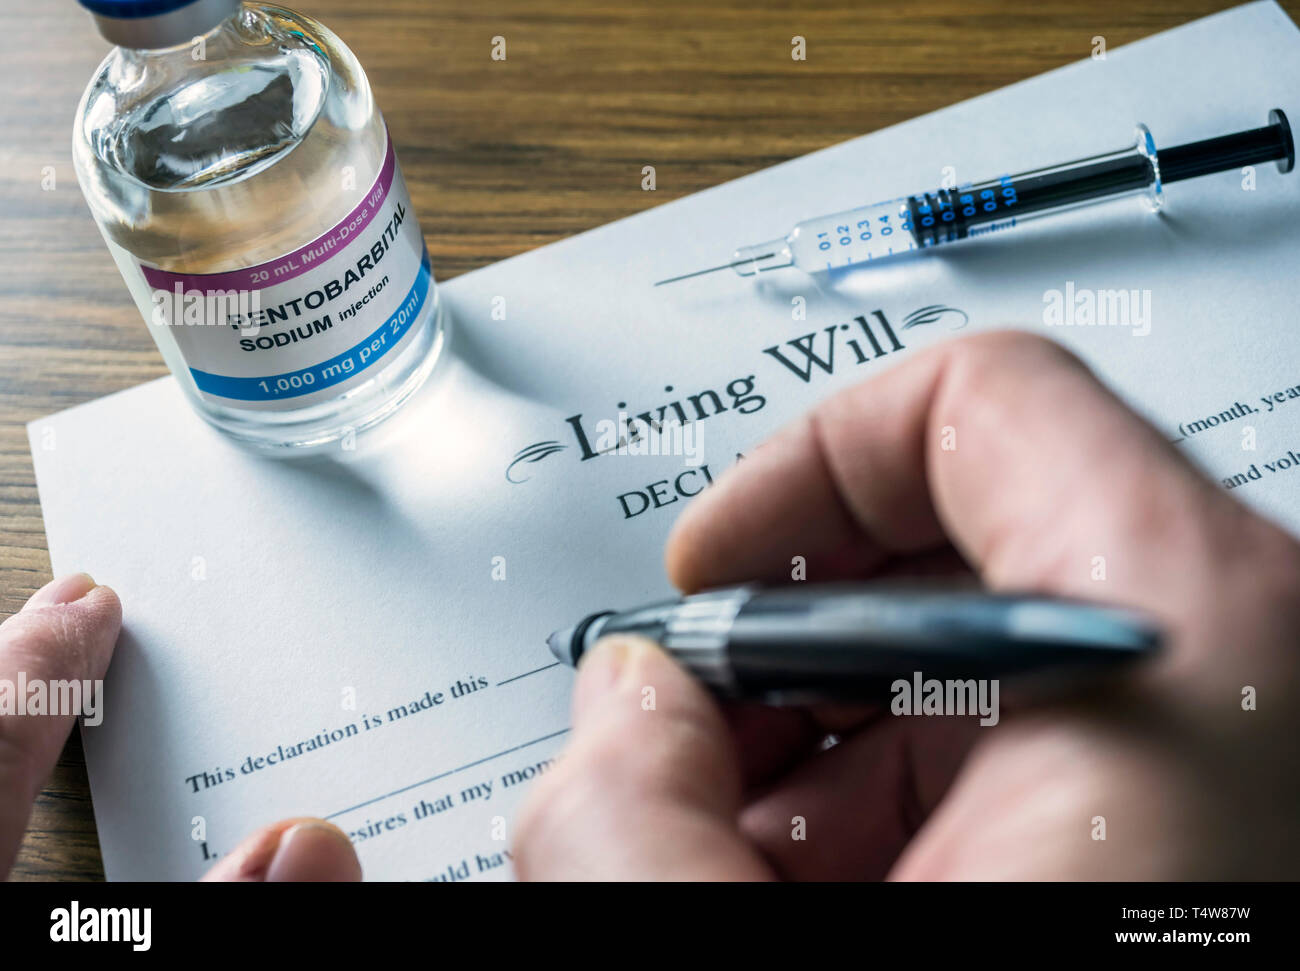 Living will declaration form Next to a vial of pentobarbital sodium to proceed to euthanasia, conceptual image Stock Photo